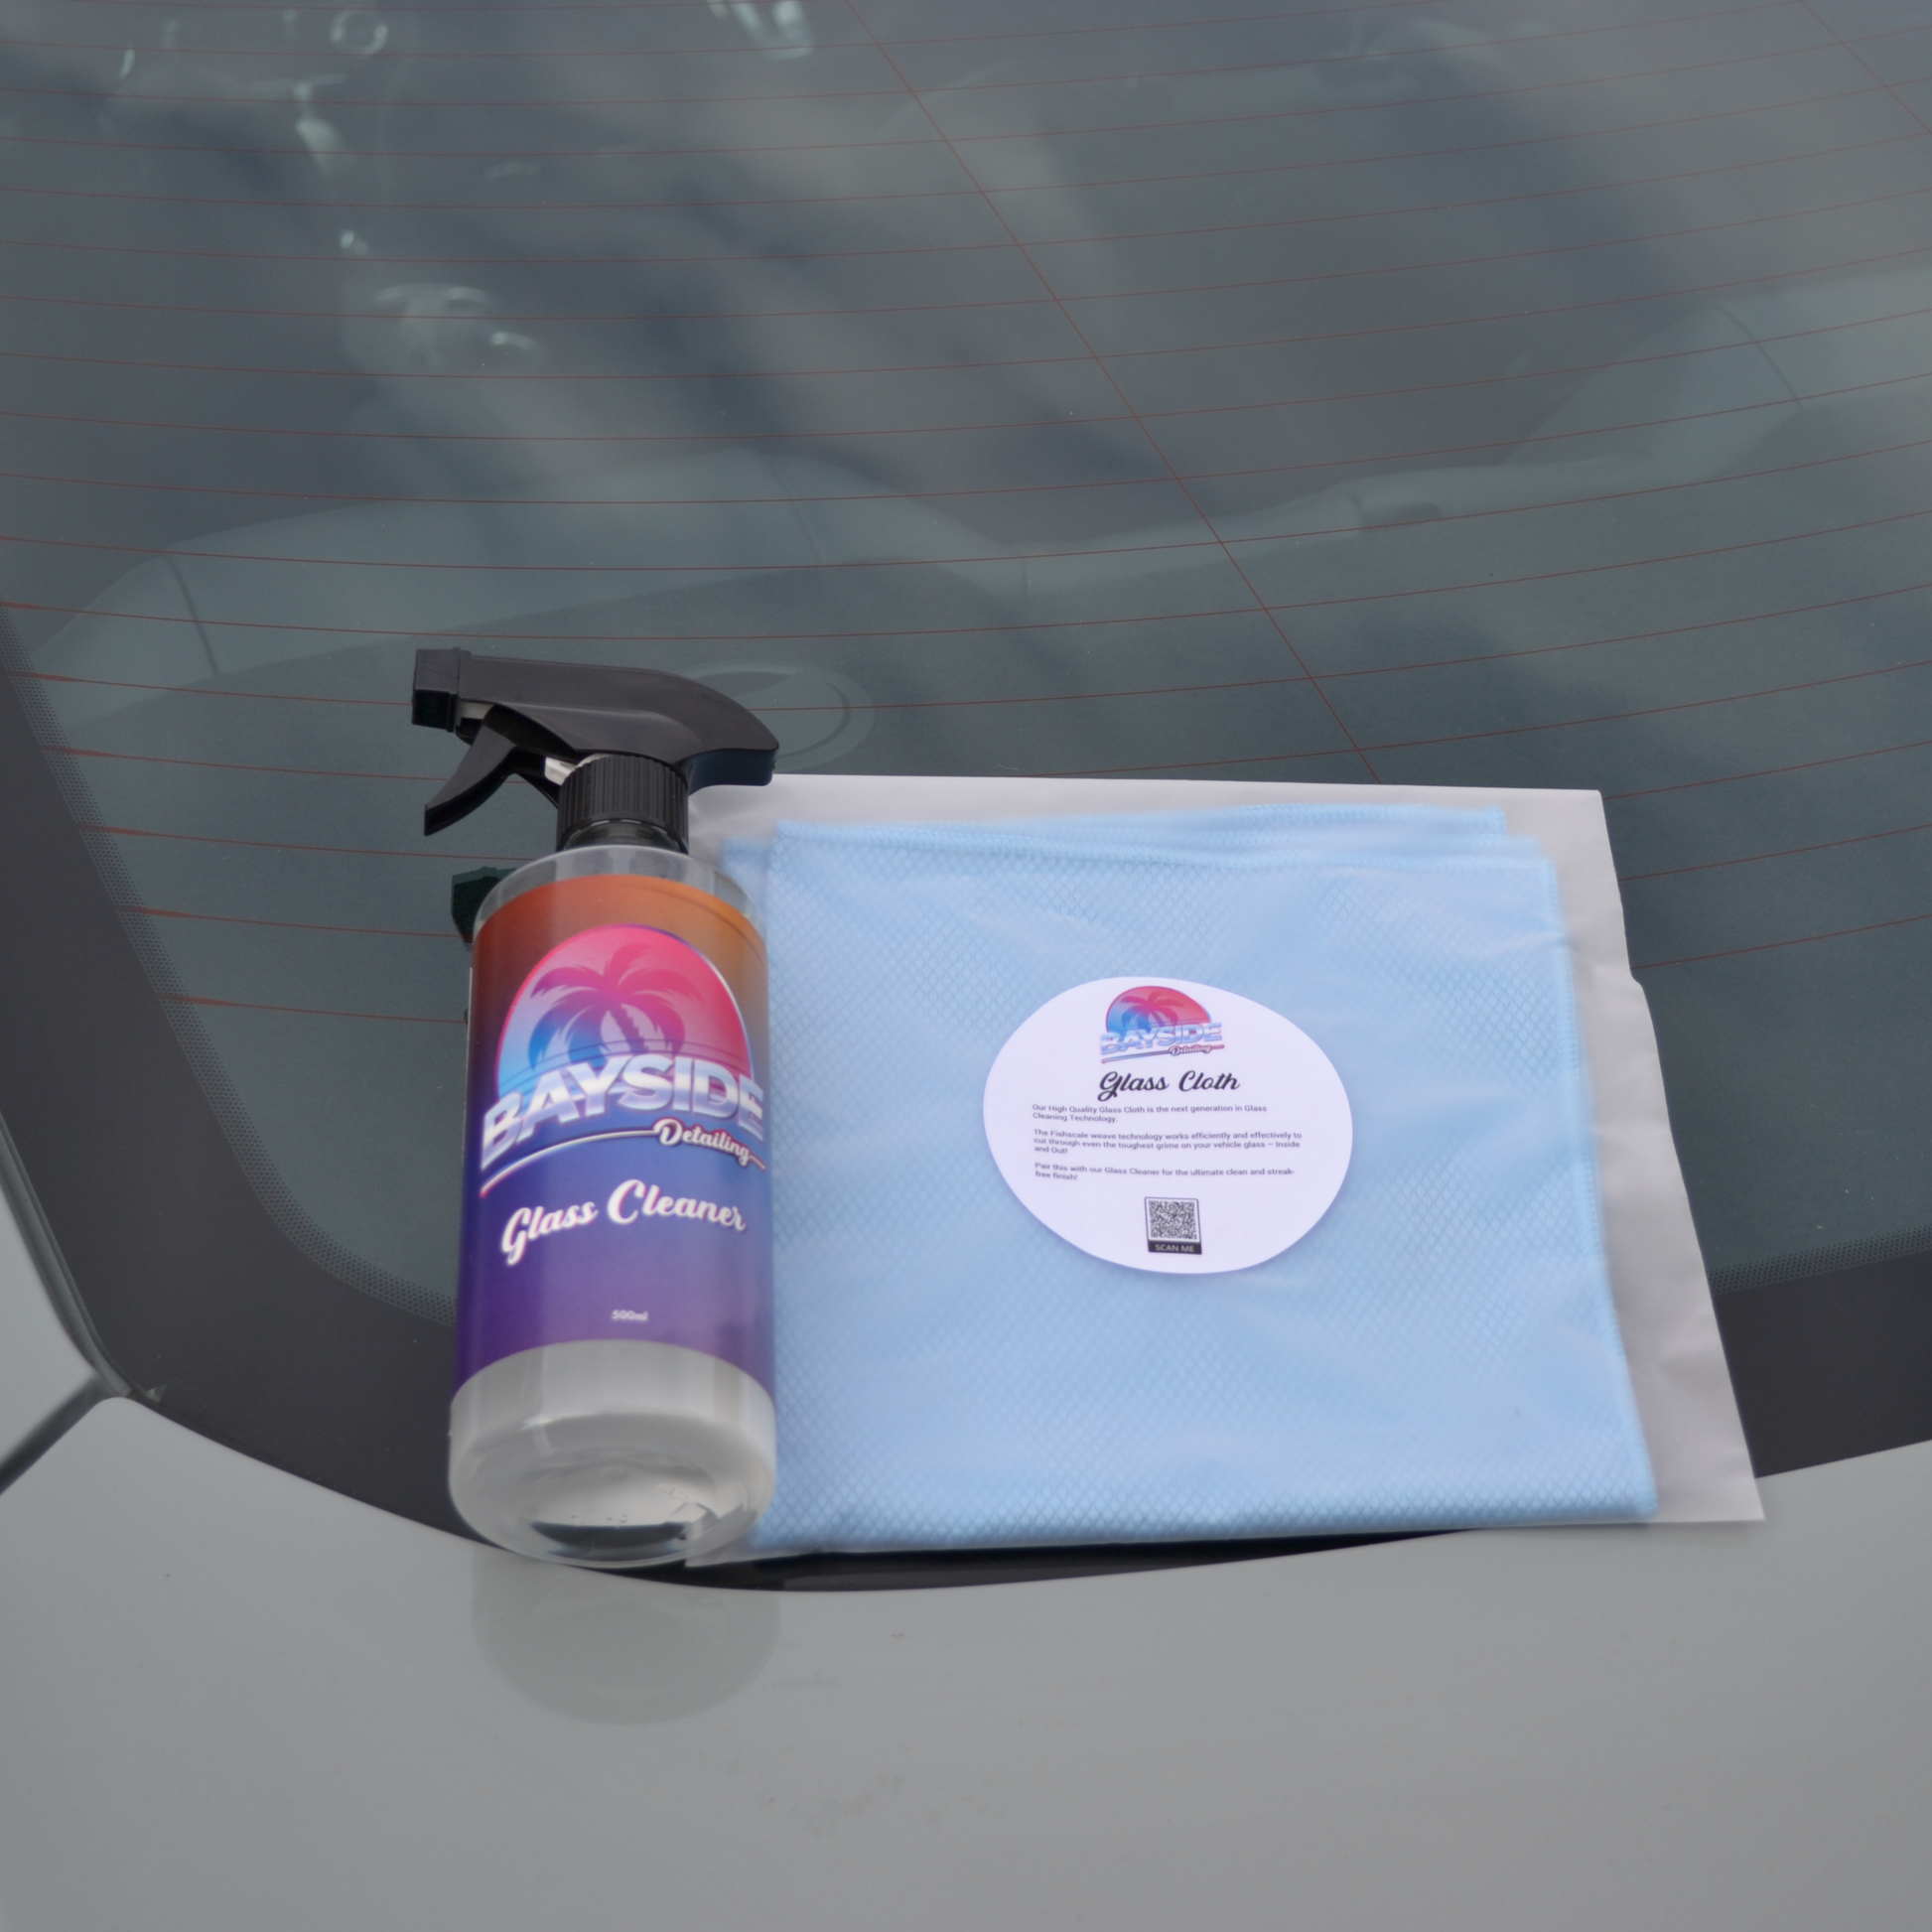 Bayside Detailing Glass cleaner